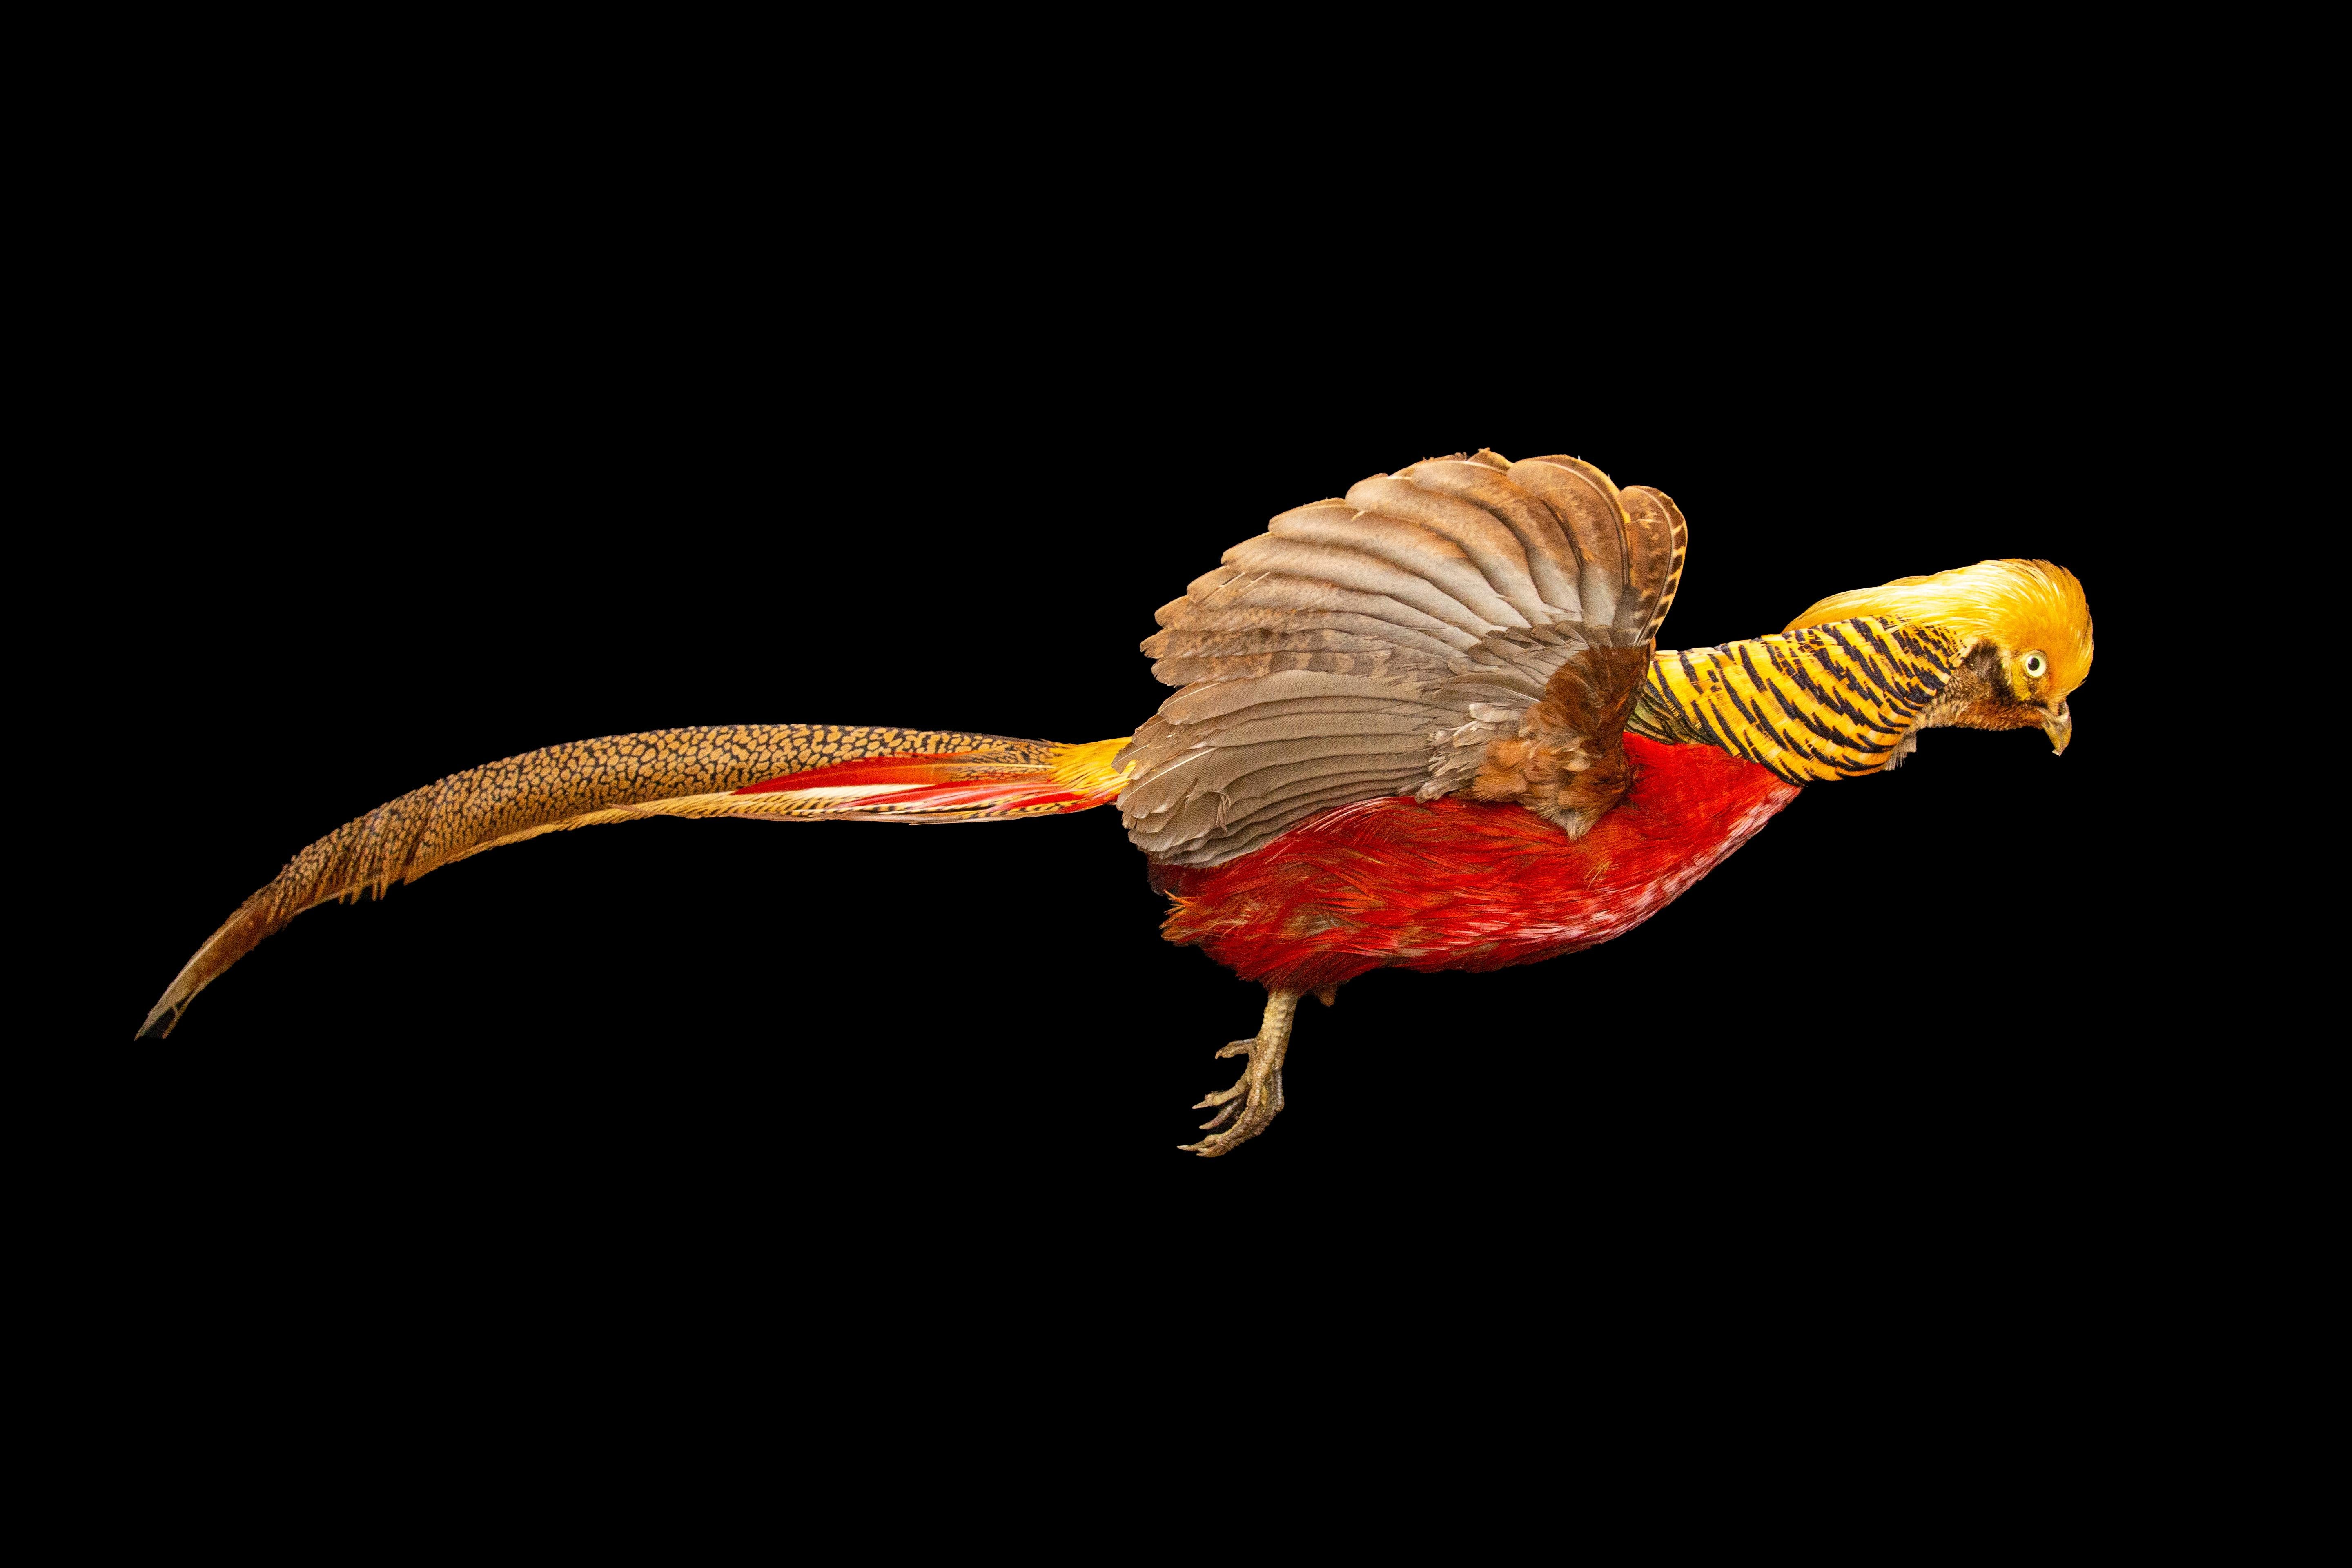 This exquisite taxidermy flying golden pheasant is a stunning addition to any collection or display. The bird has been expertly preserved and mounted, with lifelike detail captured in every feather. The vibrant golden and red plumage of the male